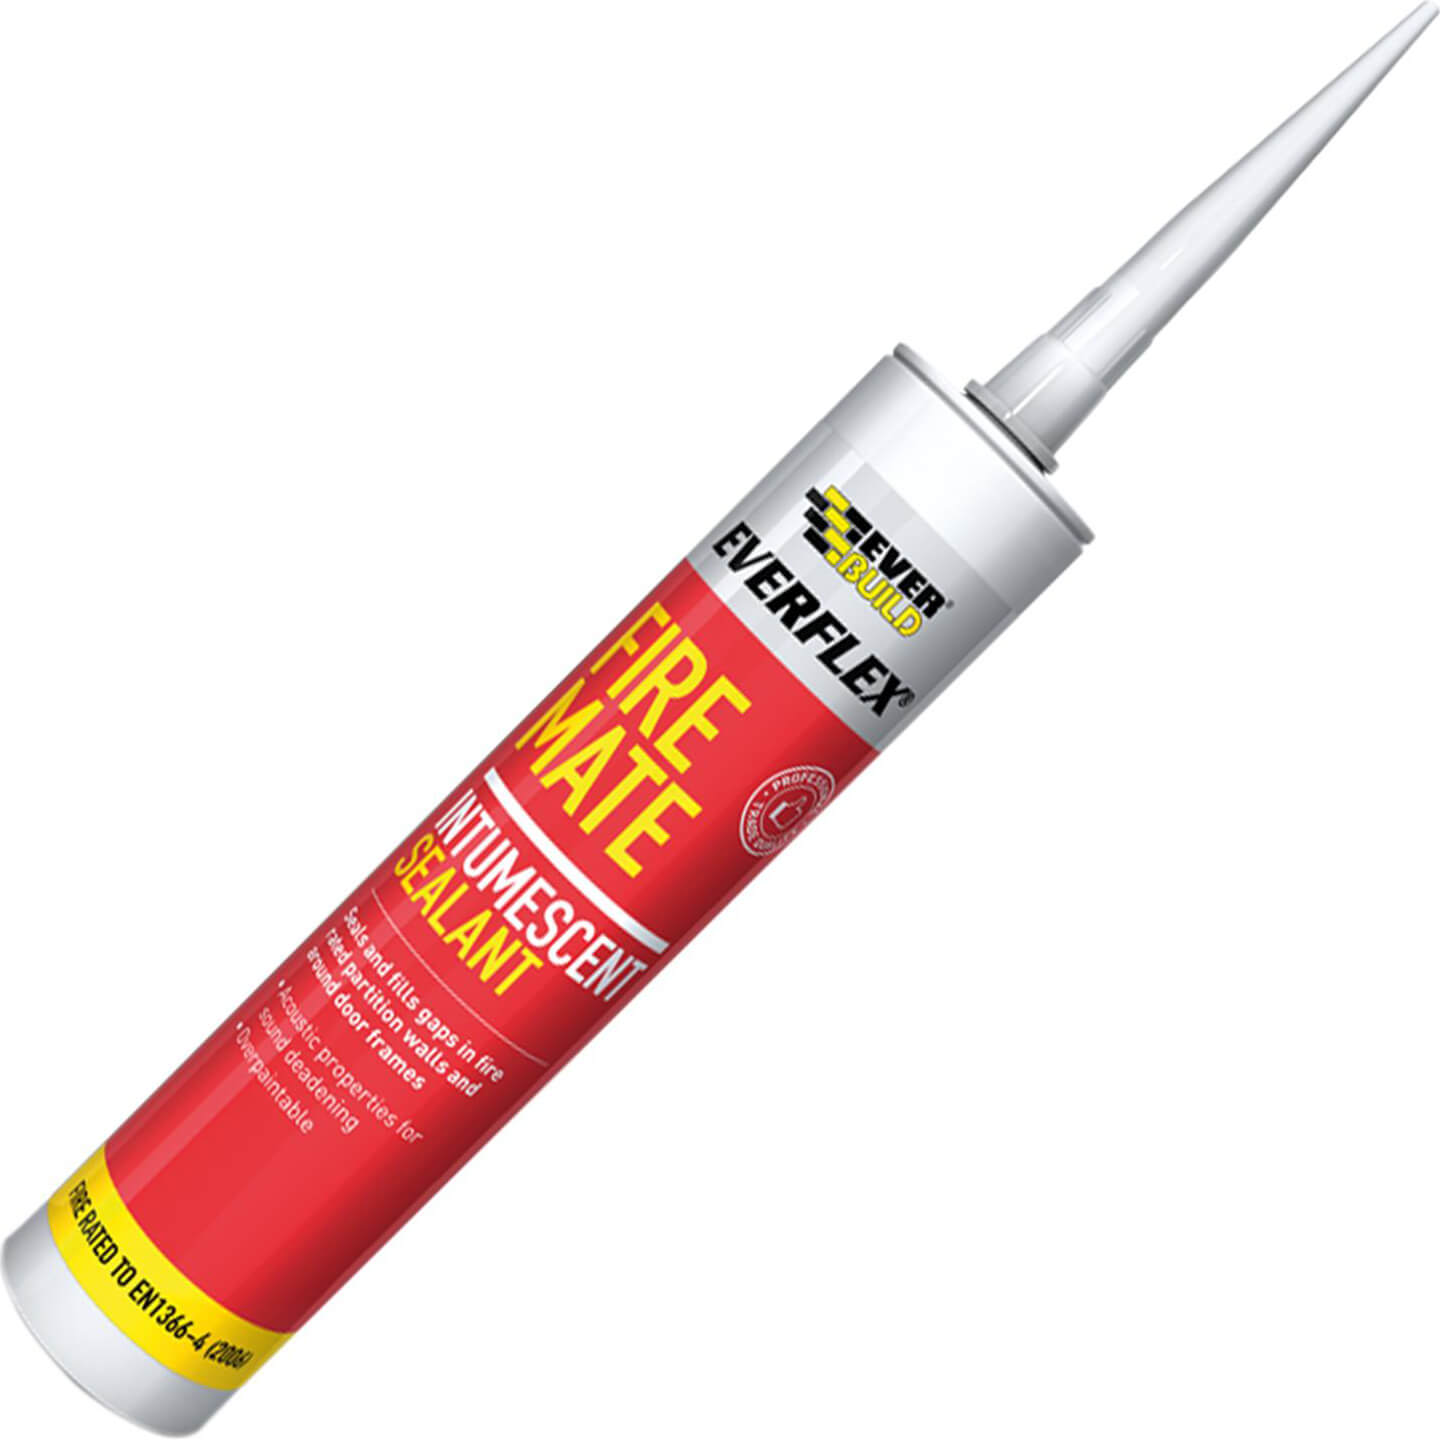 Everbuild Fire Mate Intumescent Sealant Brown